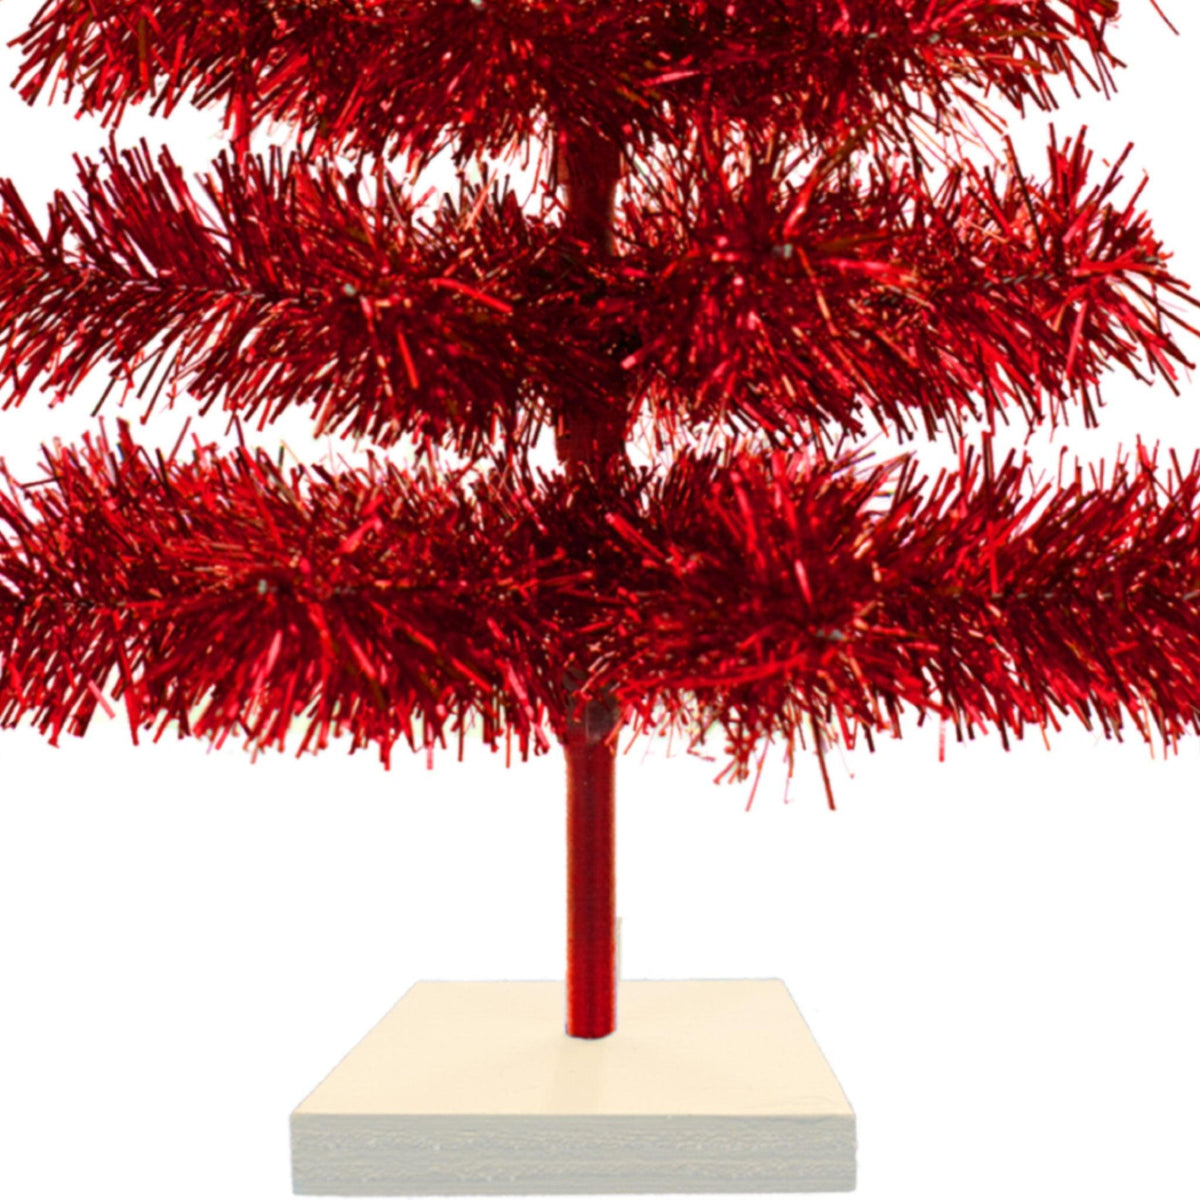 18in Red trees comes with white wood stand that is easy to detach and secures the trees upright